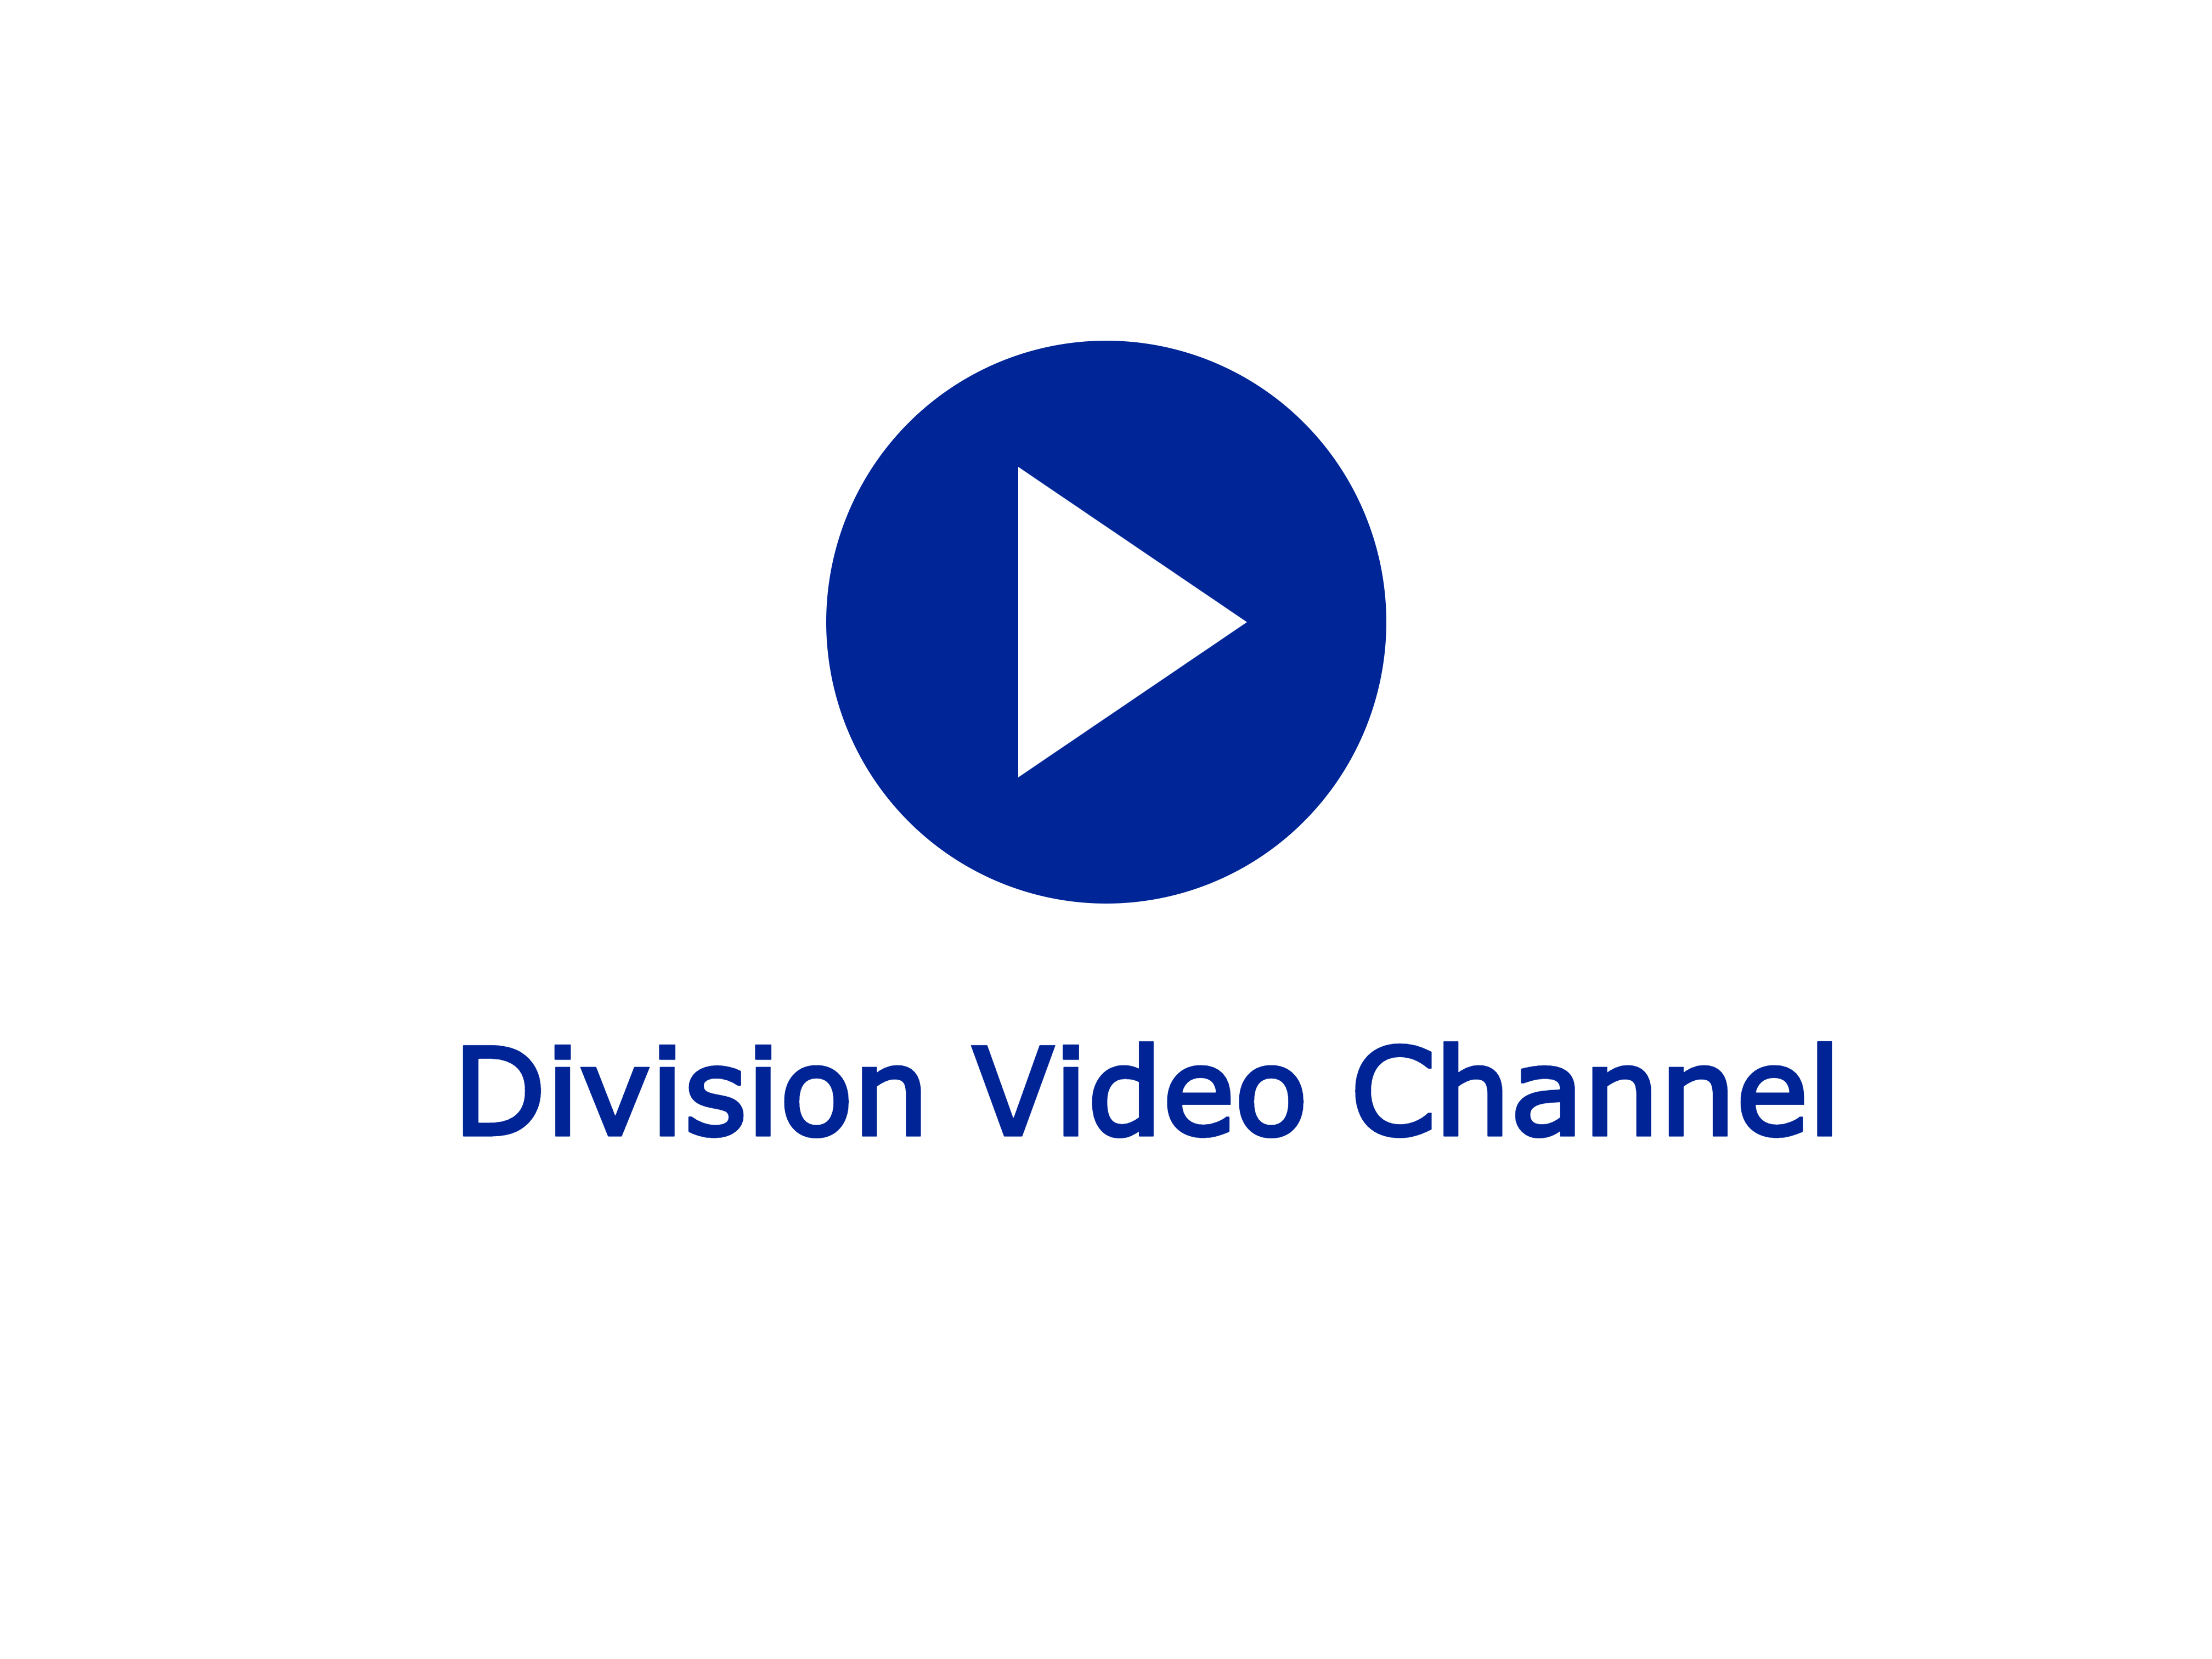 "Division Video Channel"